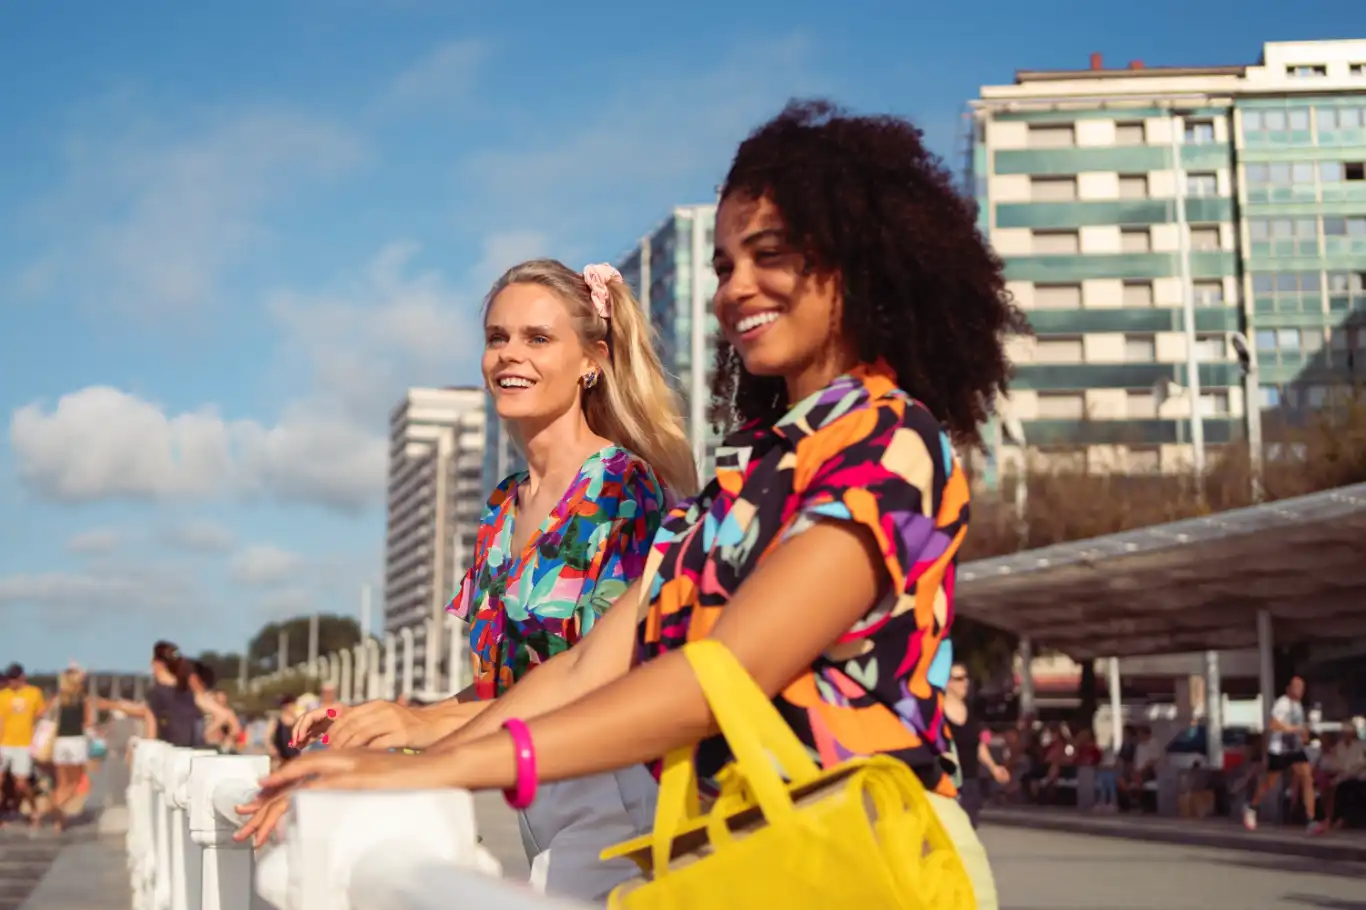 Two women enjoying the sunny day at a promenade in Rio de Janeiro, smiling and looking out over the beach, with modern buildings in the background.